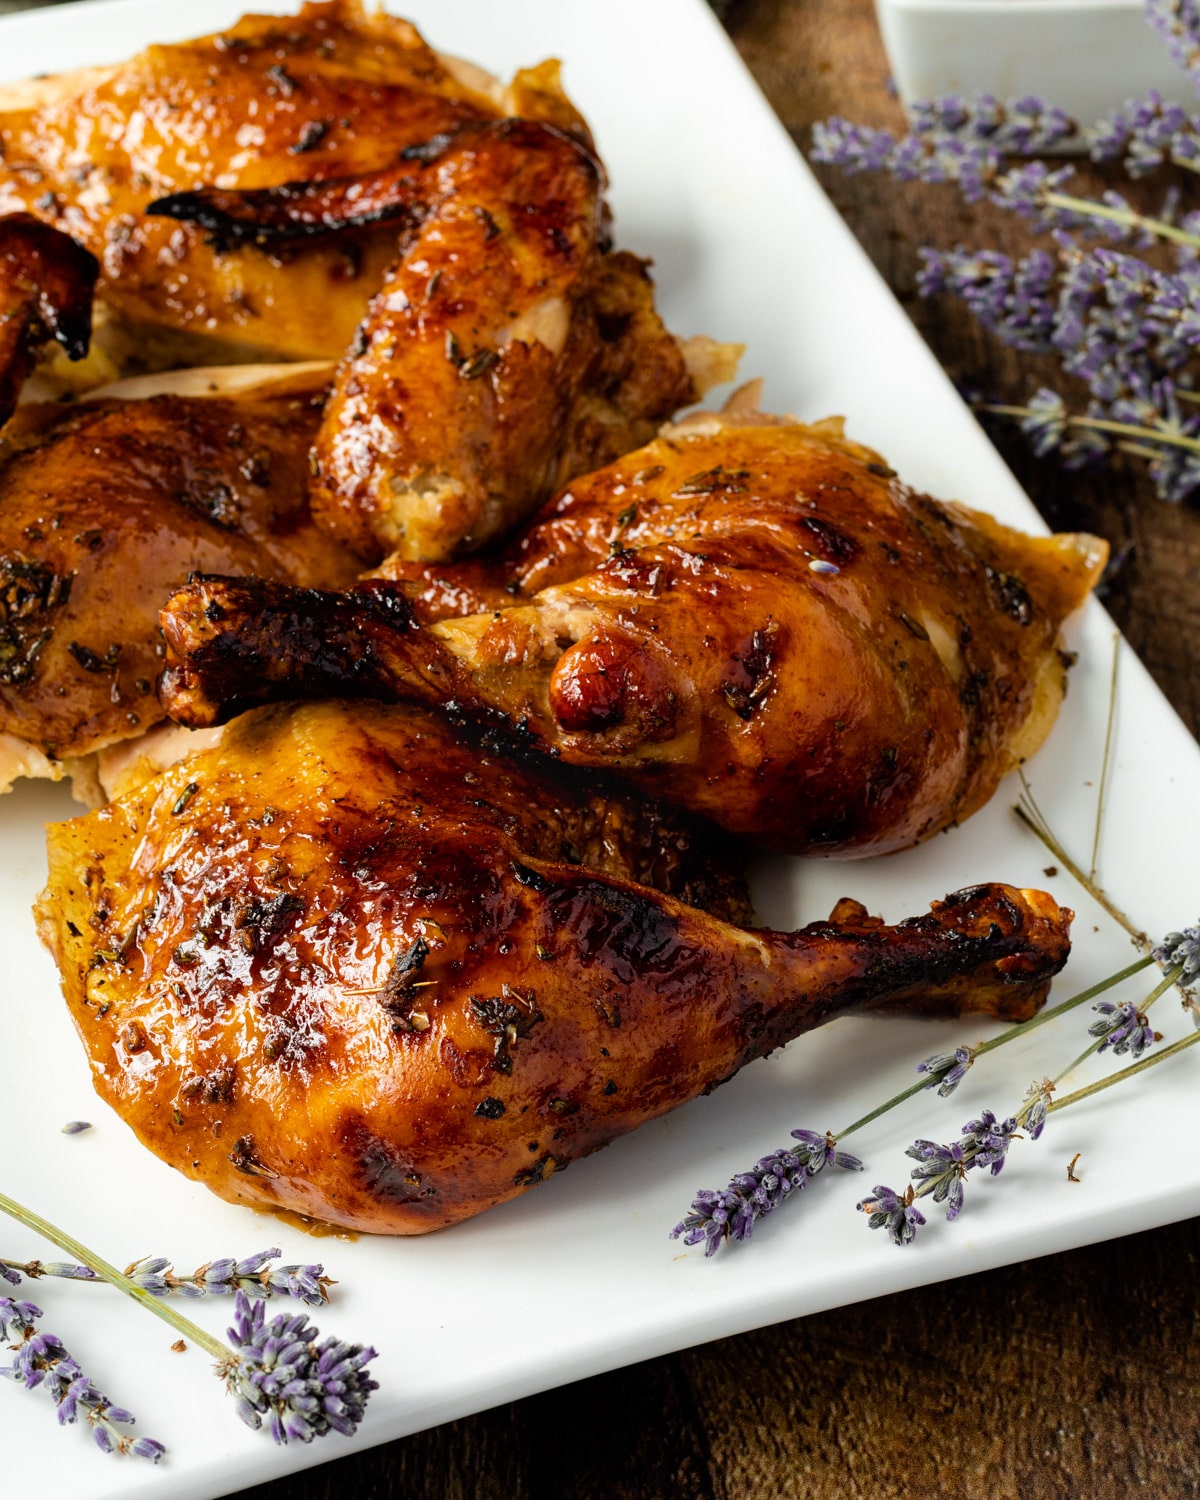 Chicken pieces roasted with lavender and herbs, on a white rectangular plate, with lavender sprigs across it.